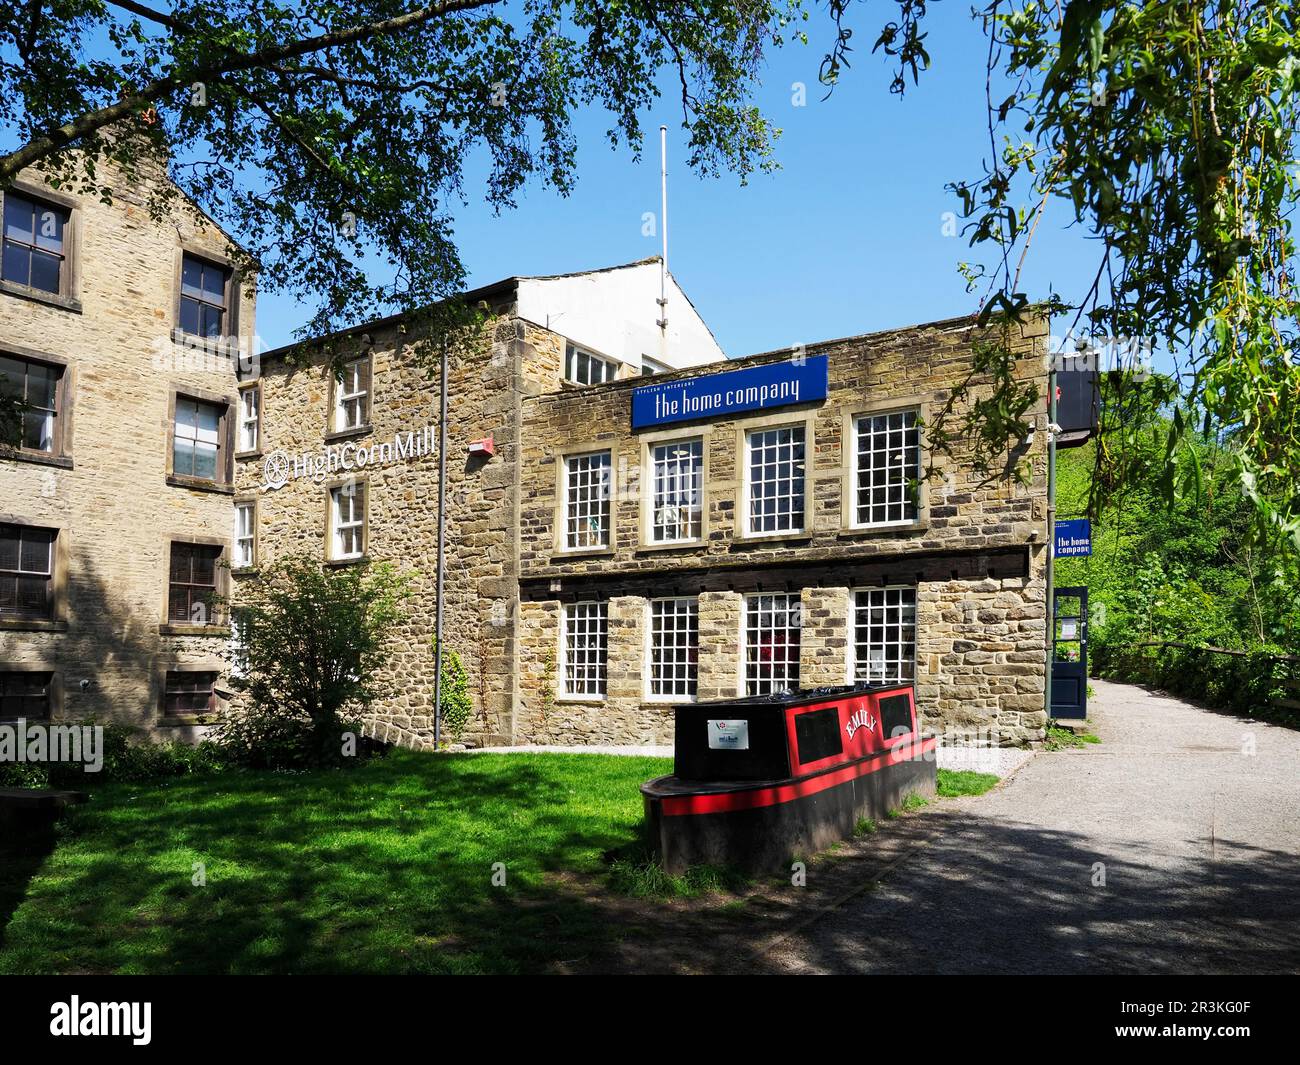 High Corn Mill housing businesses and a working water wheel at Skipton North Yorkshire England Stock Photo